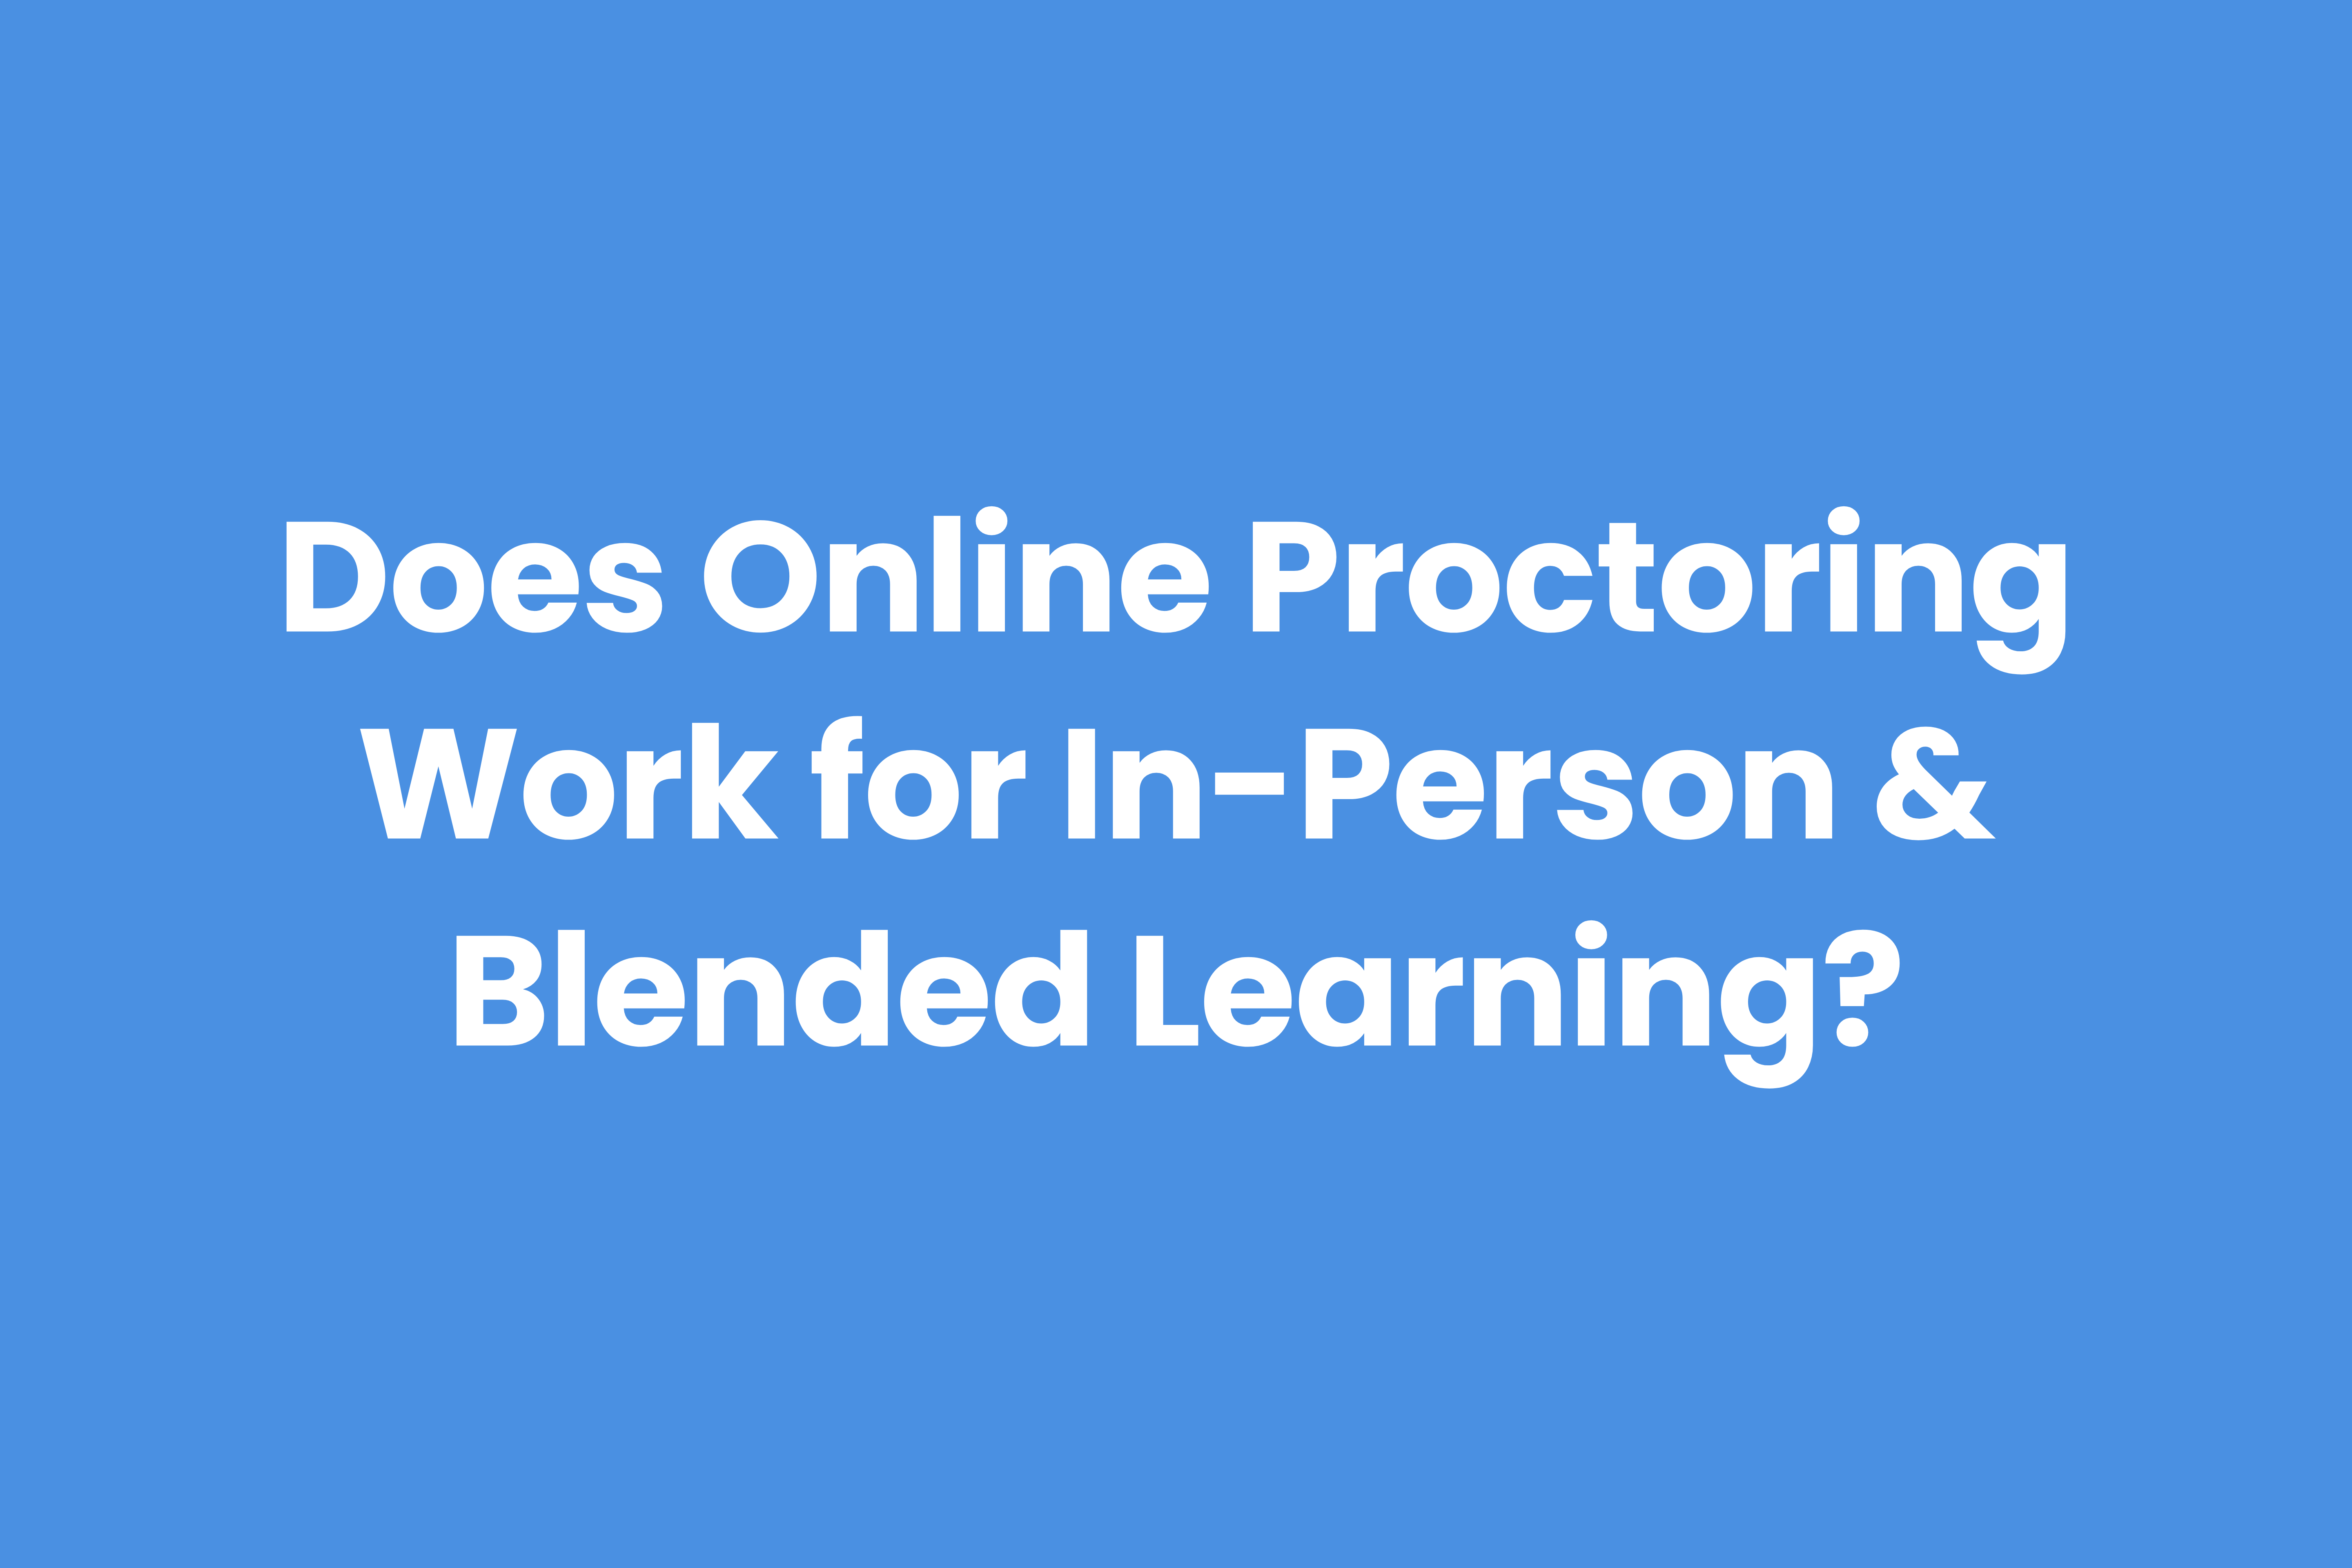 Can in-person classes and blended courses benefit from online proctoring?